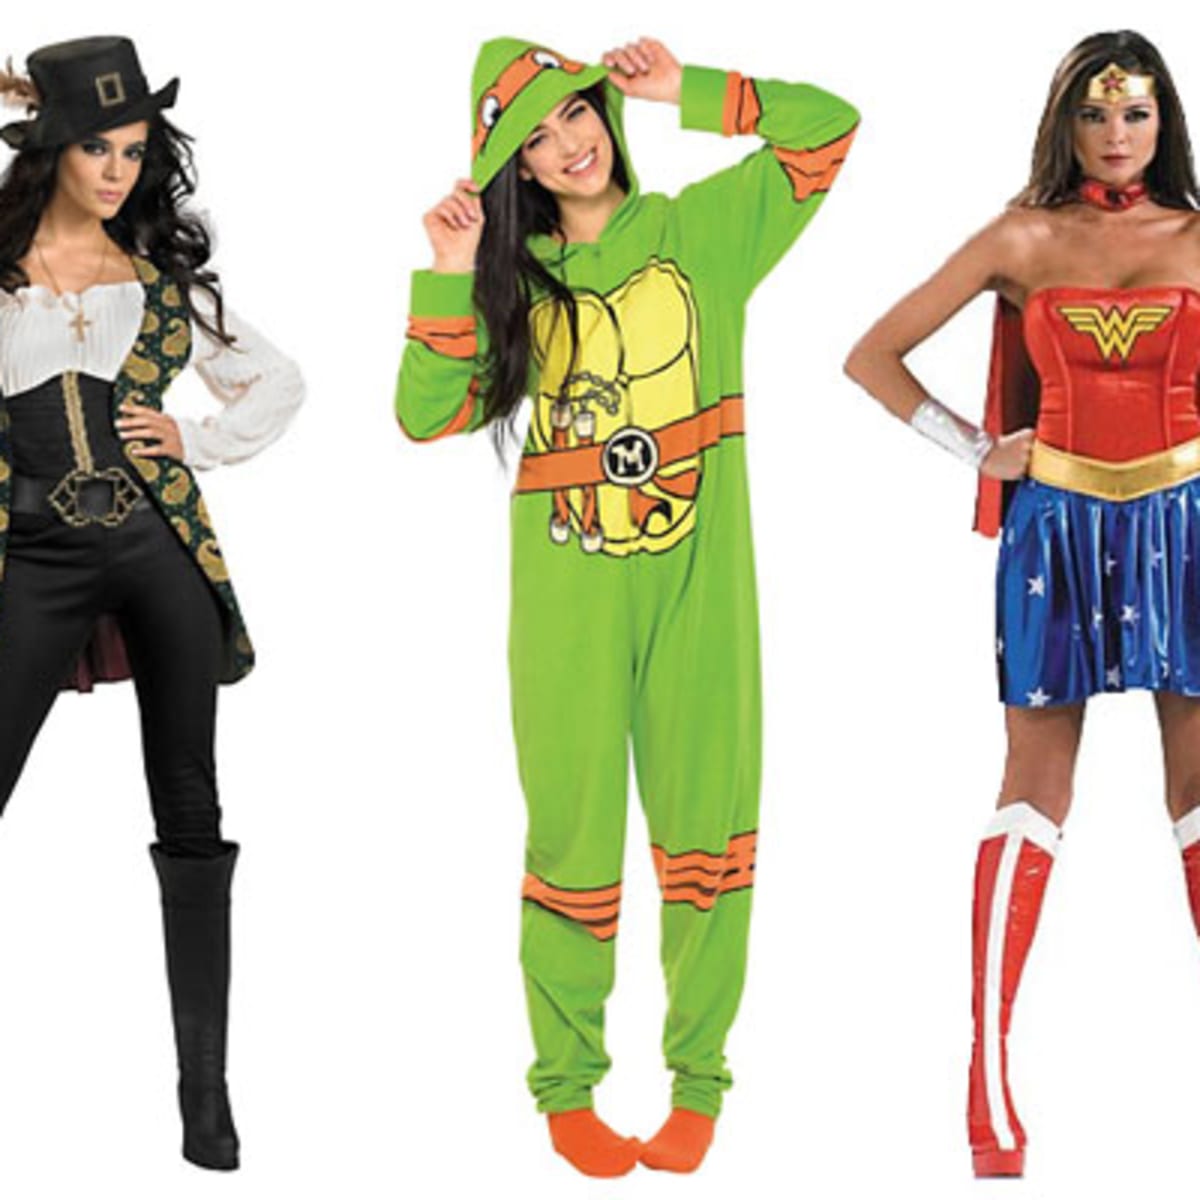 10 Last-Minute, Cheap, Diy Costumes To Up Your Halloween Game - Thestreet